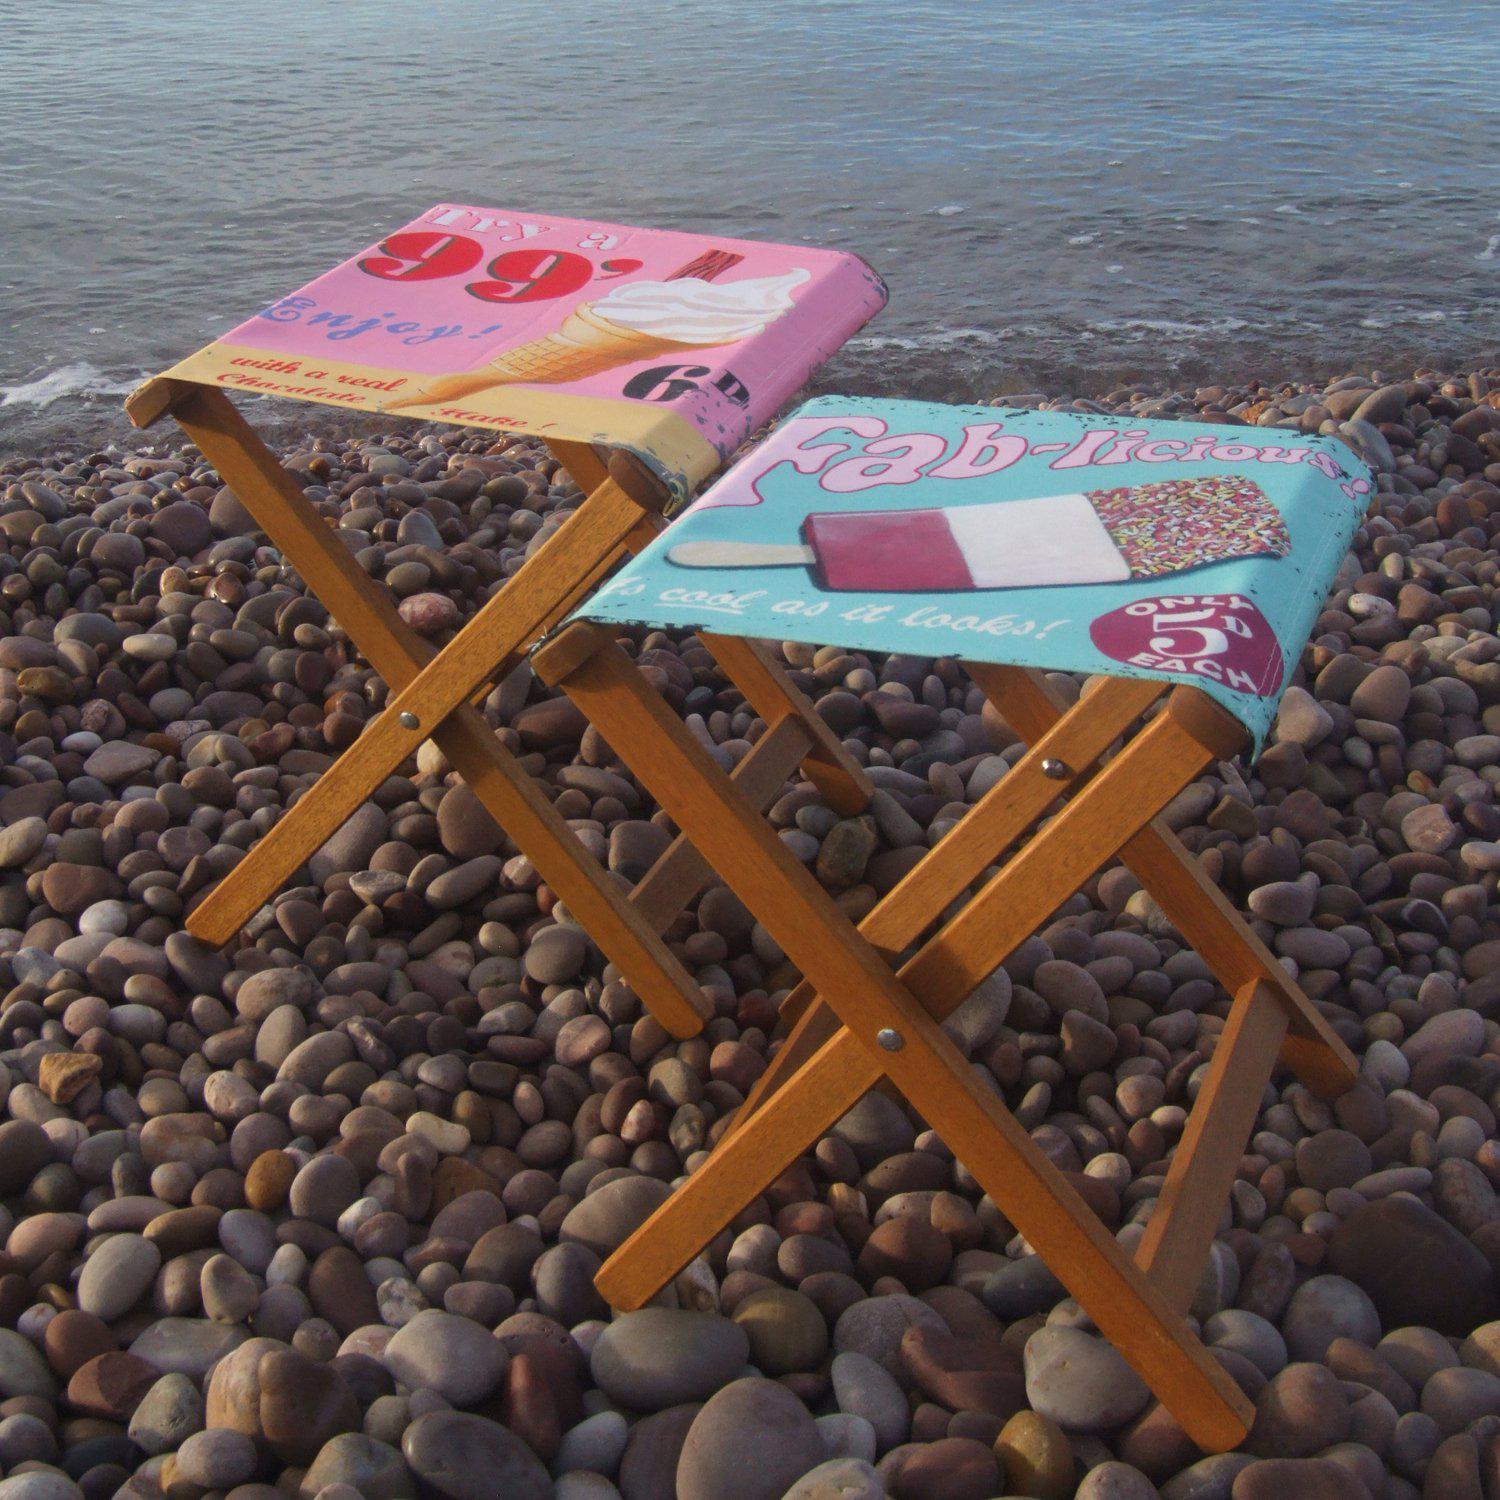 99 Flake - Martin Wiscombe - Outdoor Glamping Camping  Stool